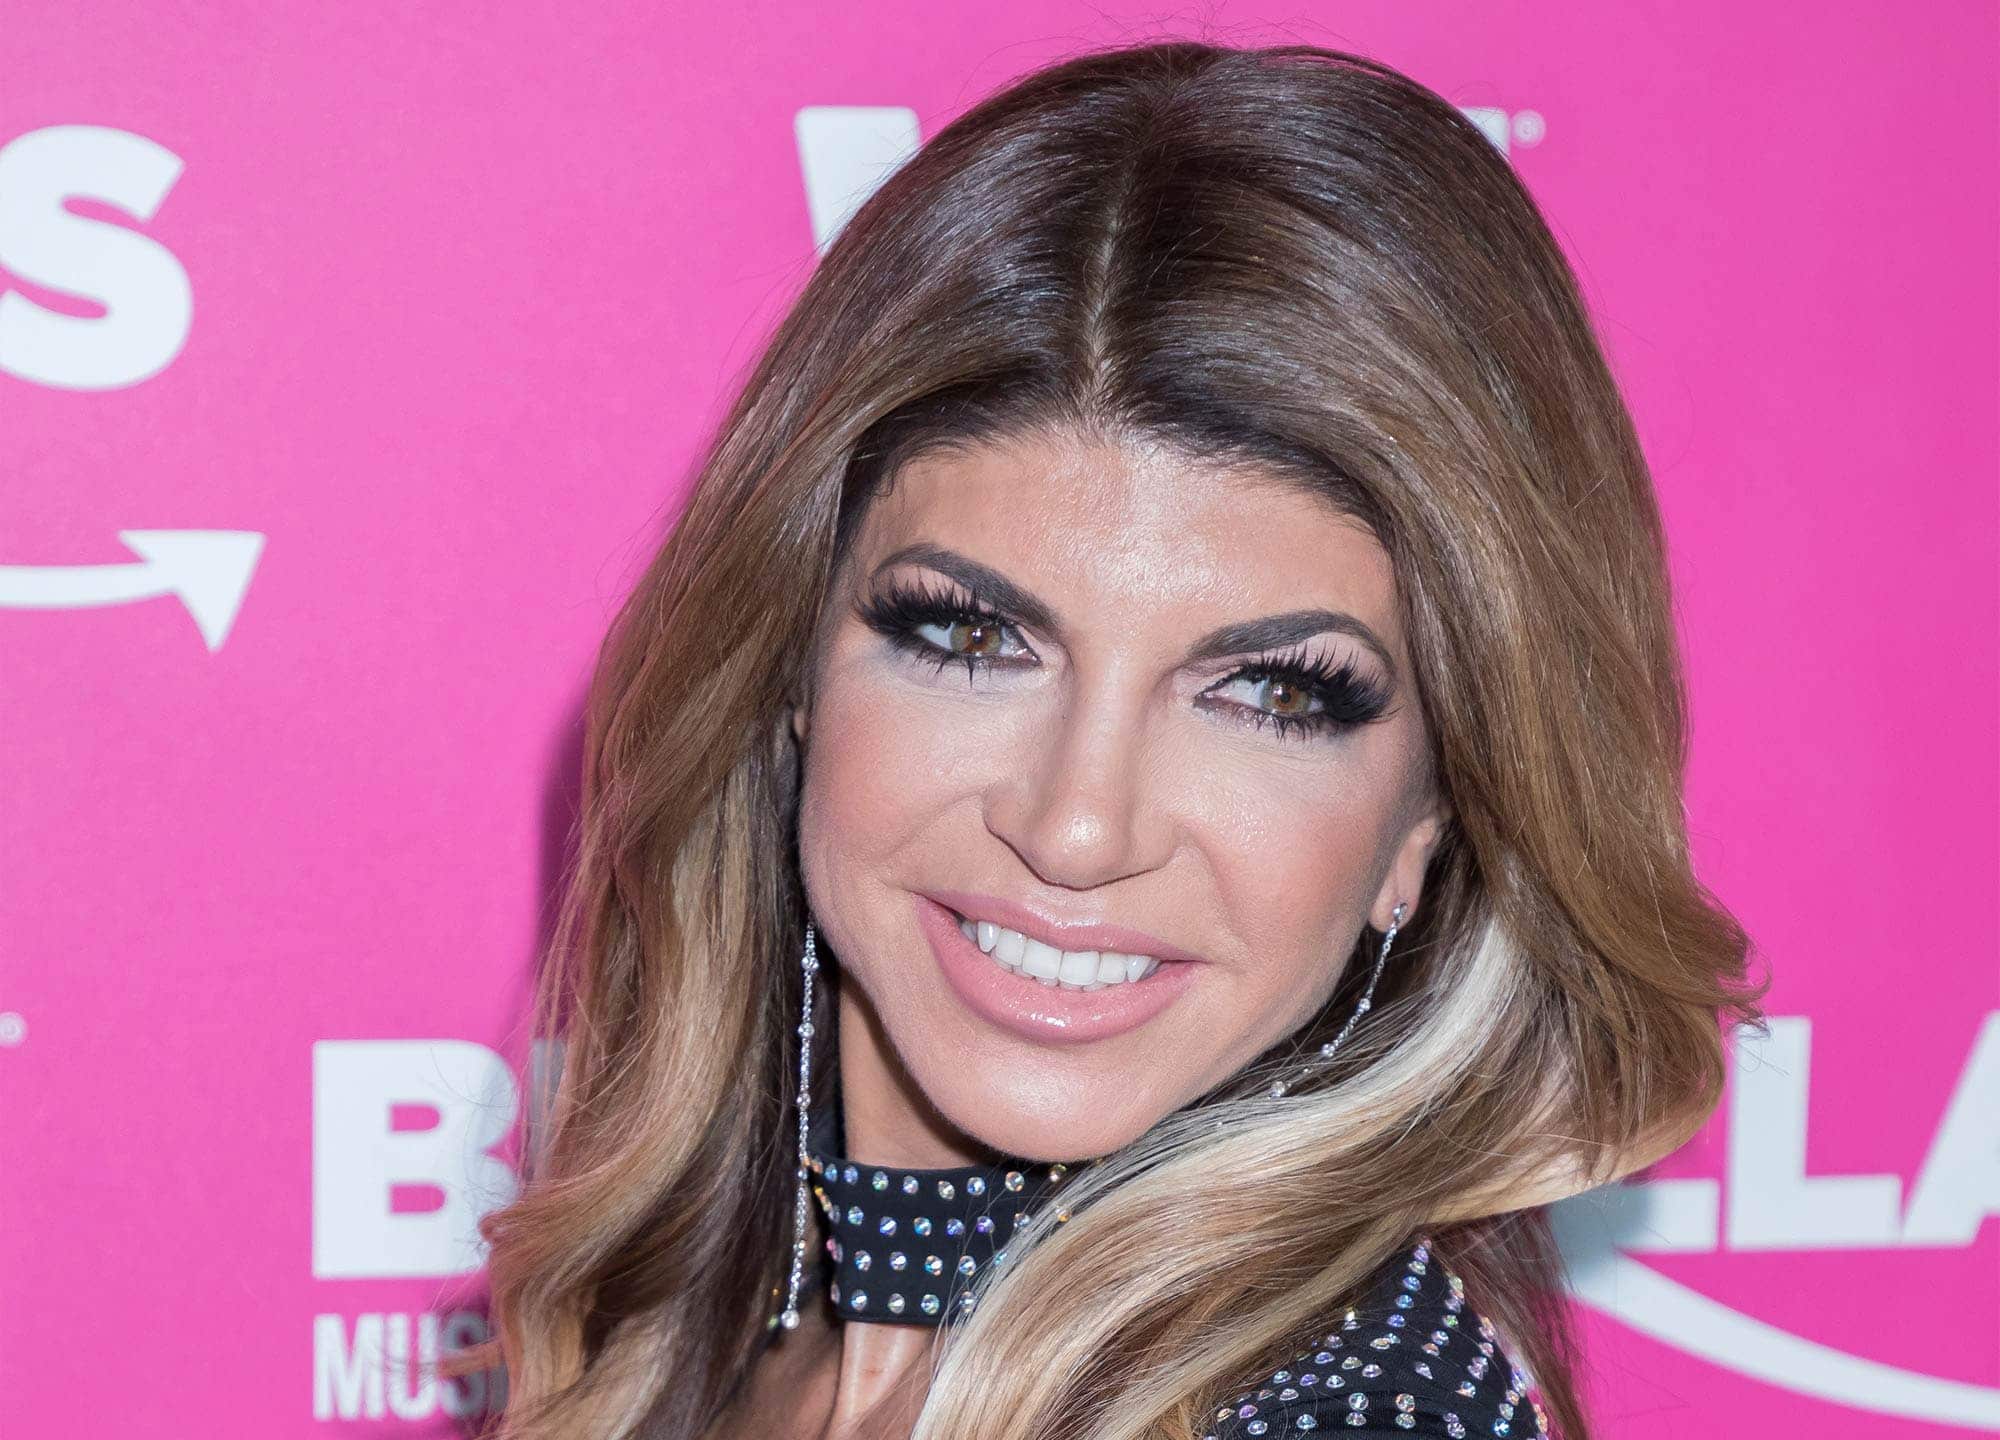 RHONJ Teresa Giudice just shared that she got a nose job earlier this year, citing long-term insecurities that she had a “tomato nose."